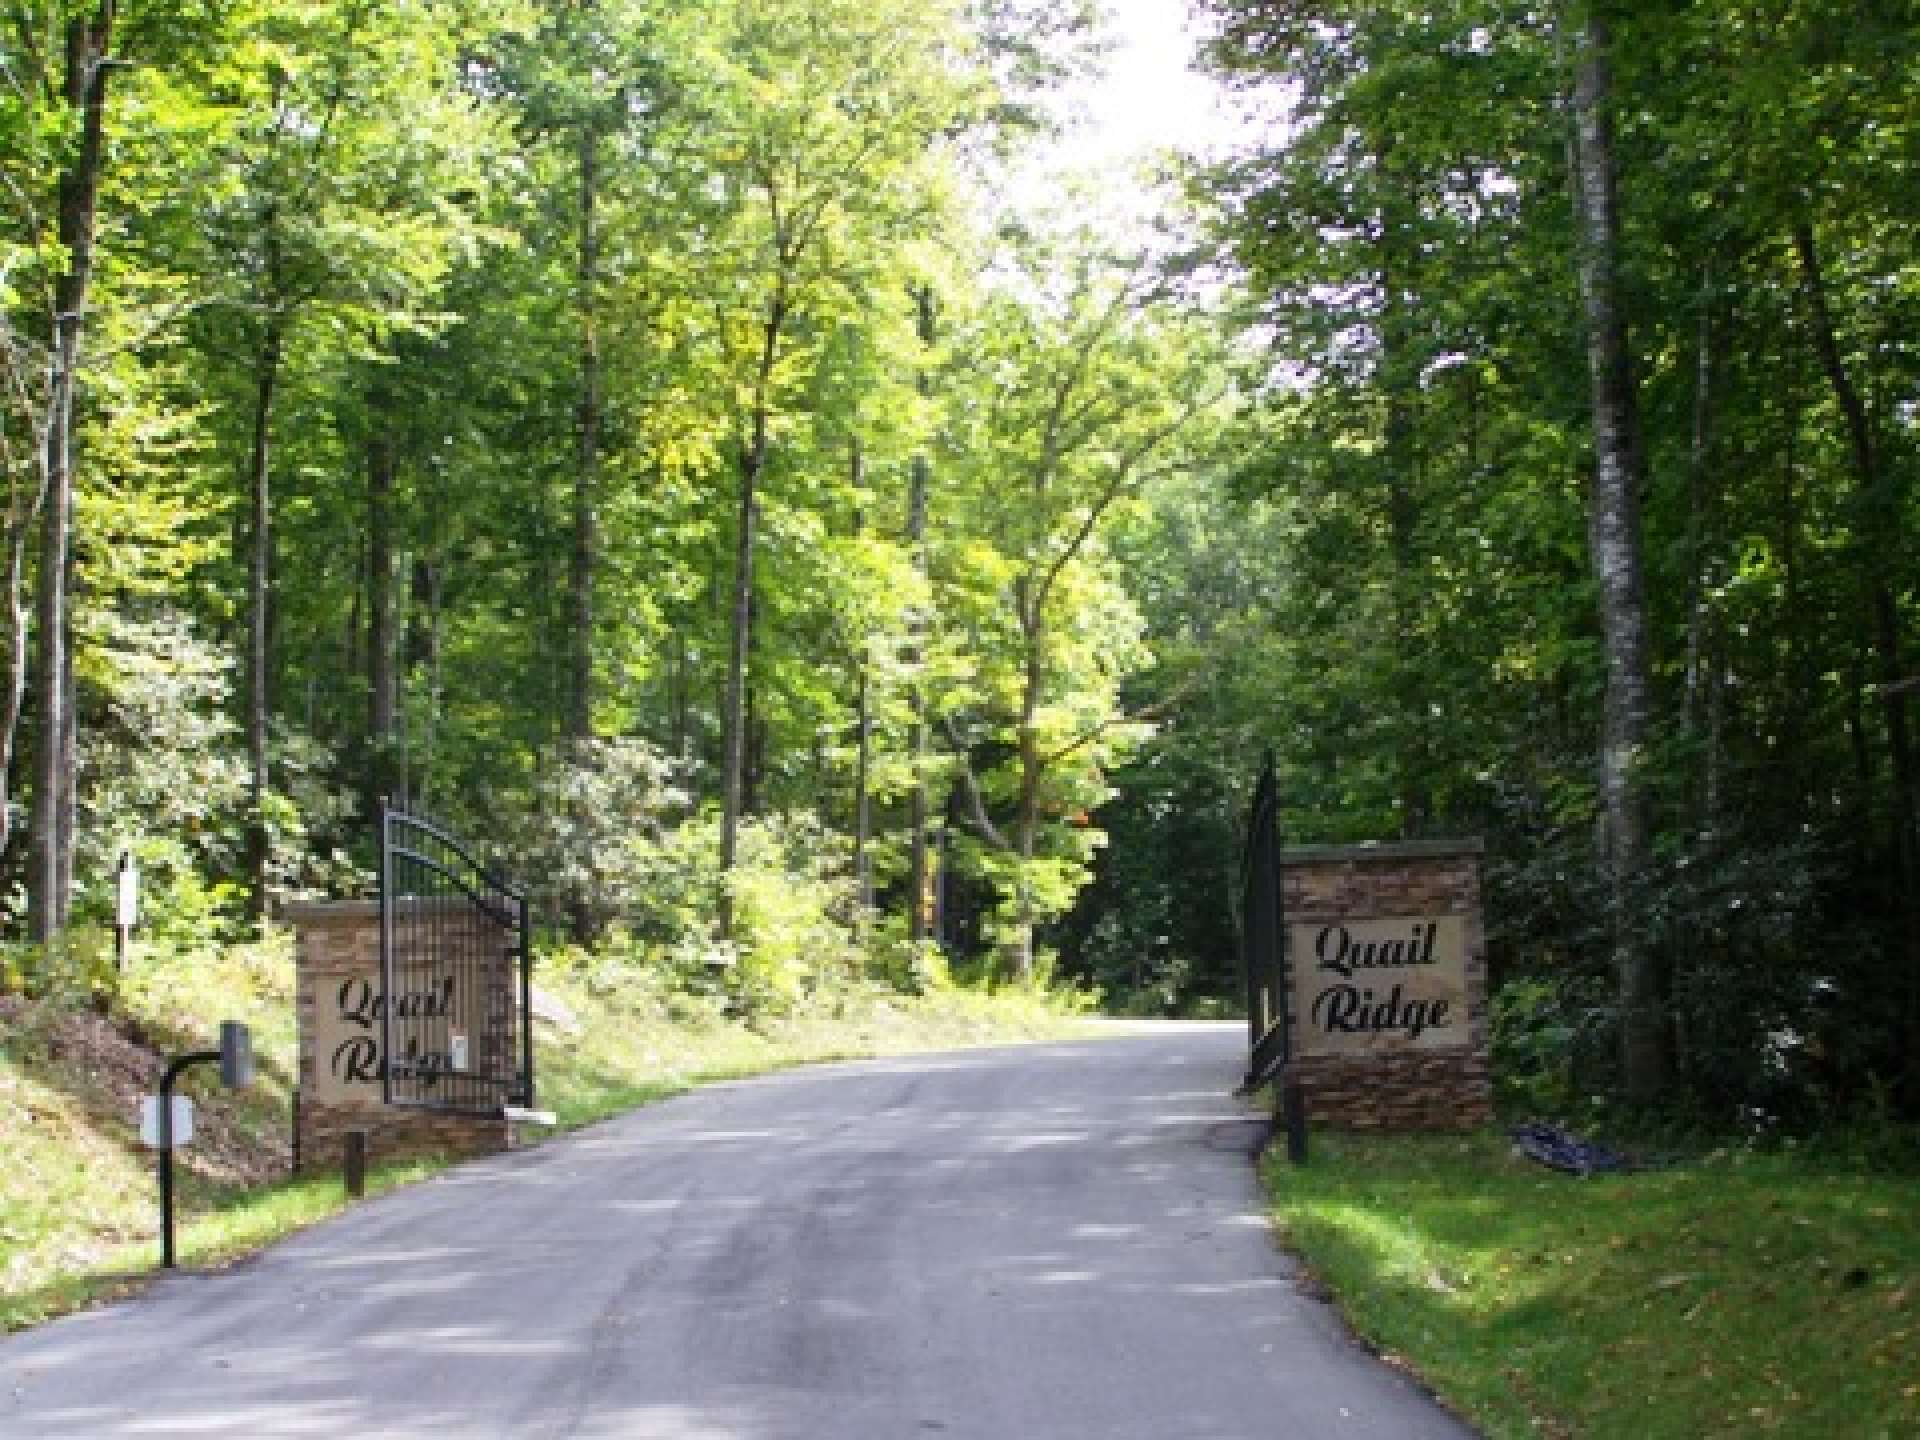 Quail Ridge is a rustic mountain community with gated entrance, paved streets, and underground utilities including fiber optic cable.